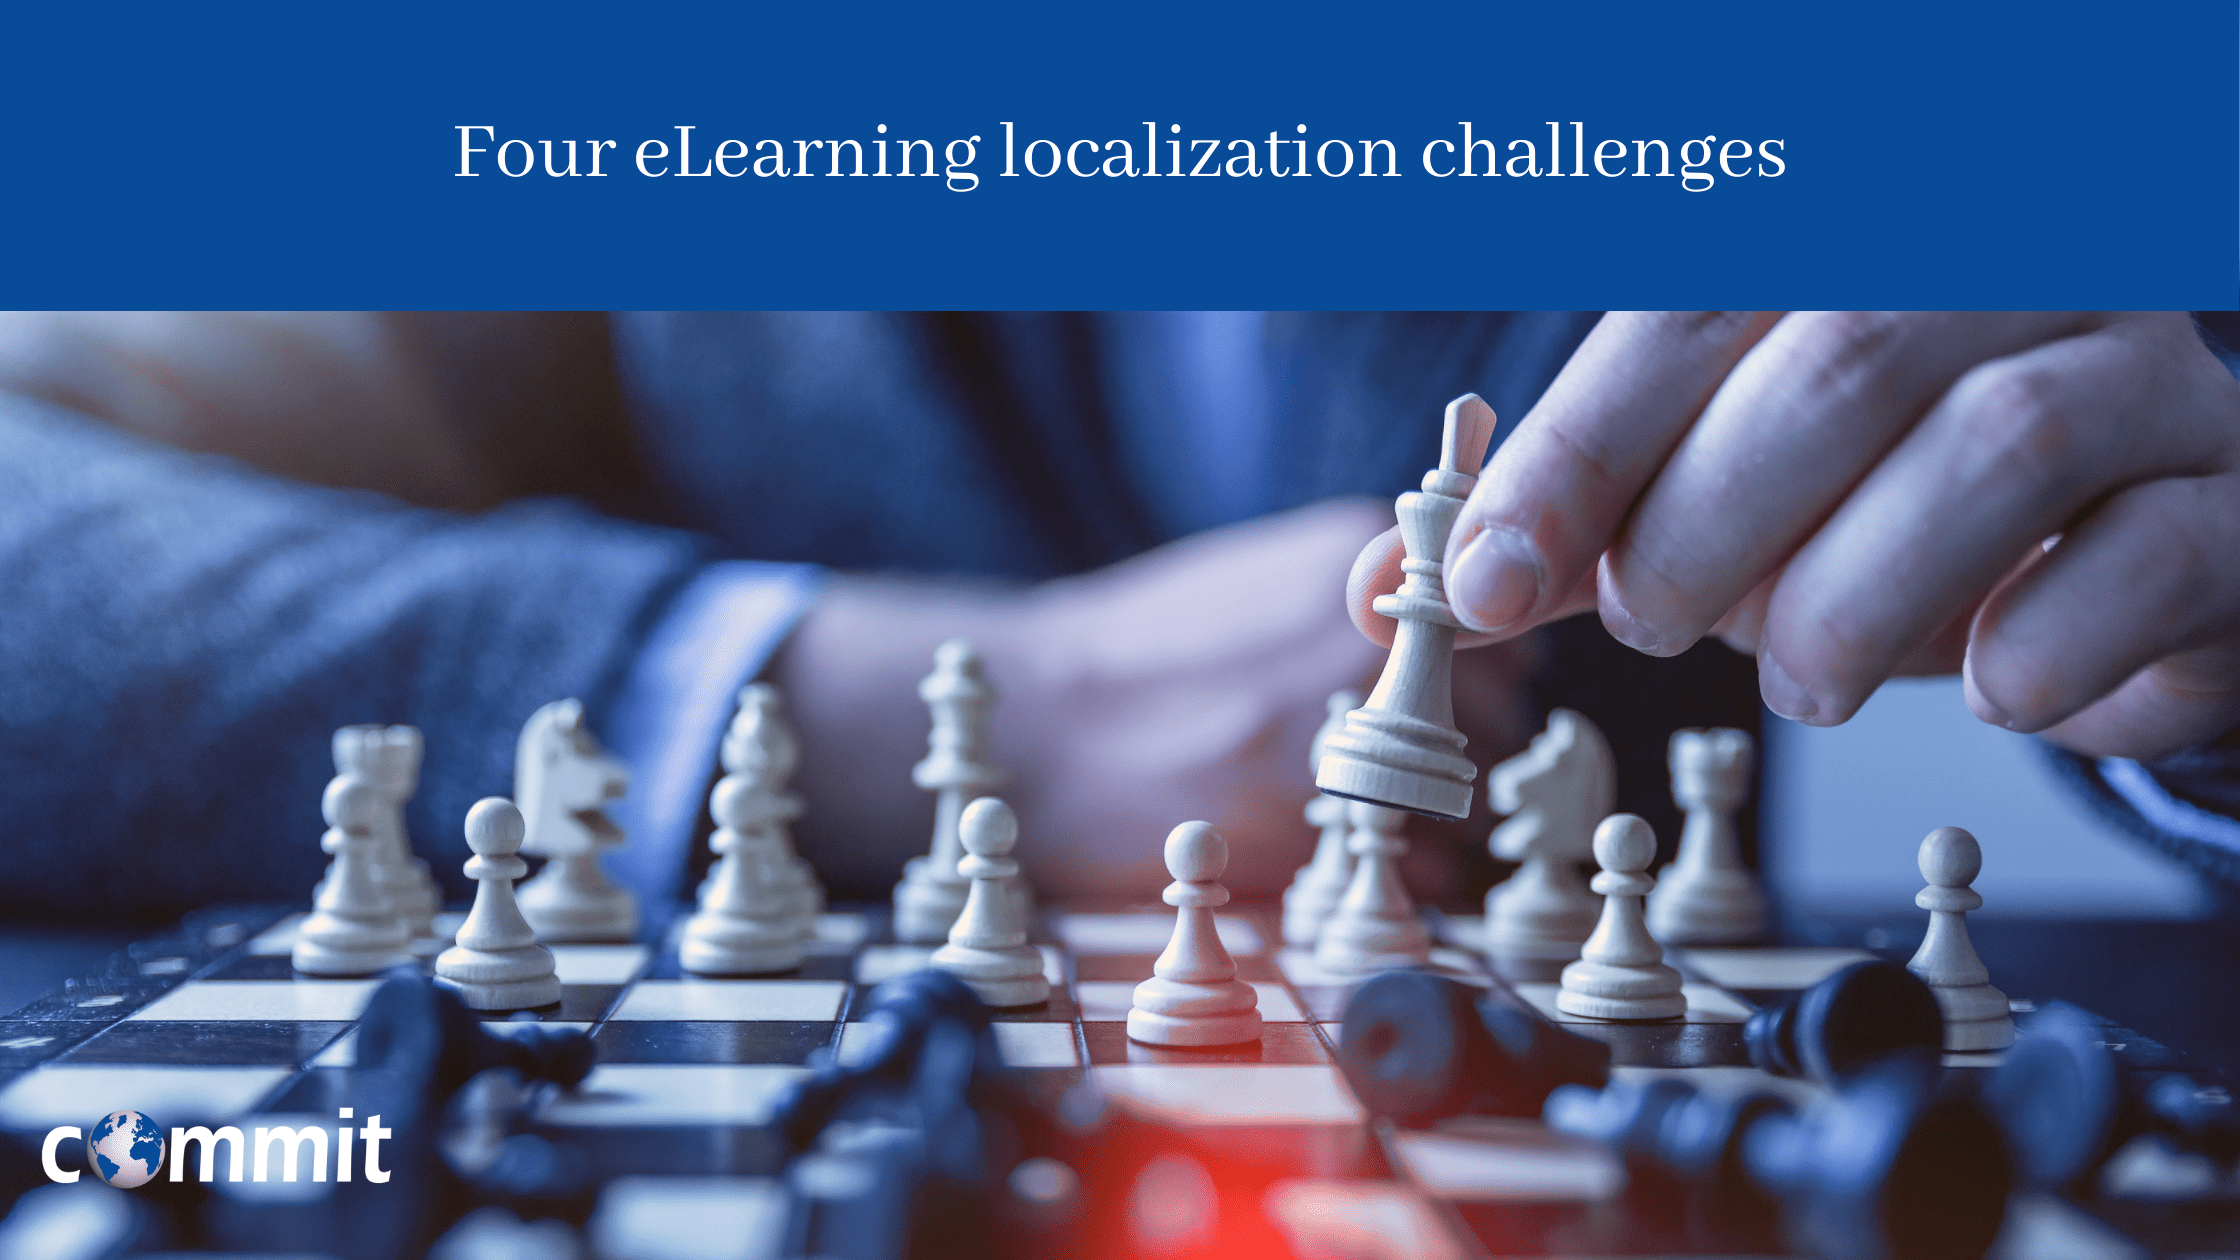 Four eLearning localization challenges